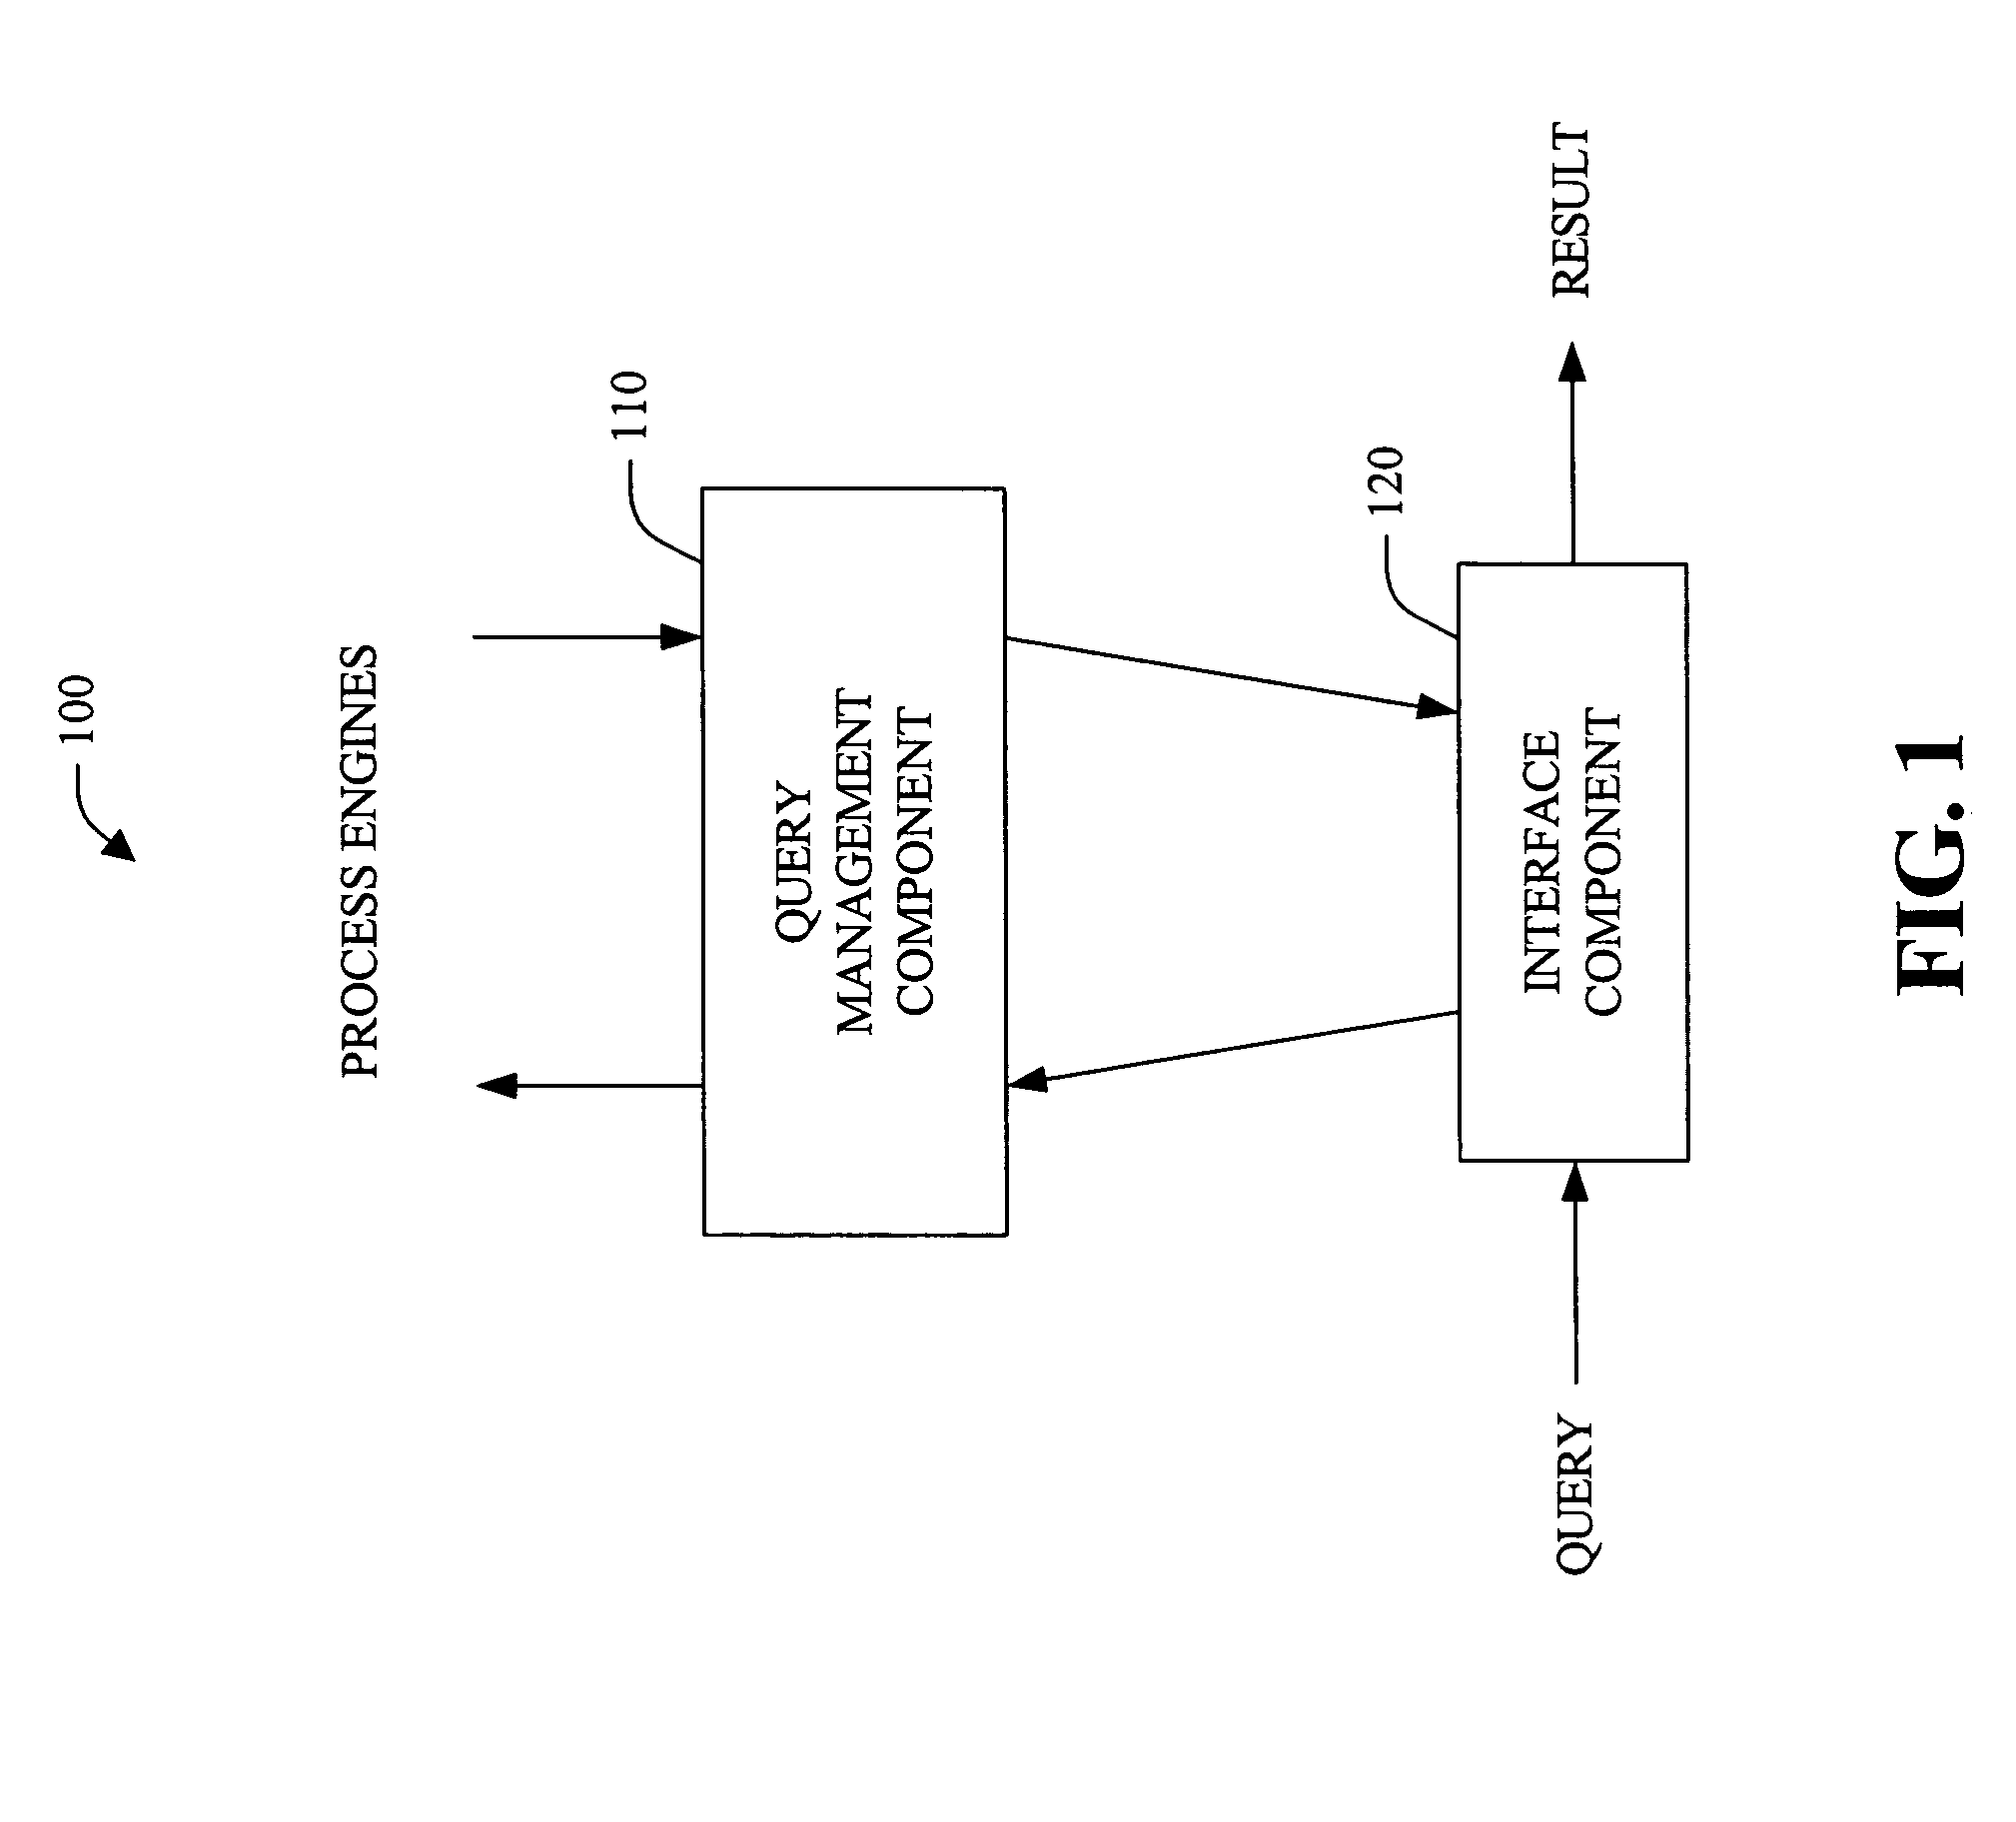 Systems and methods that employ correlated synchronous-on-asynchronous processing